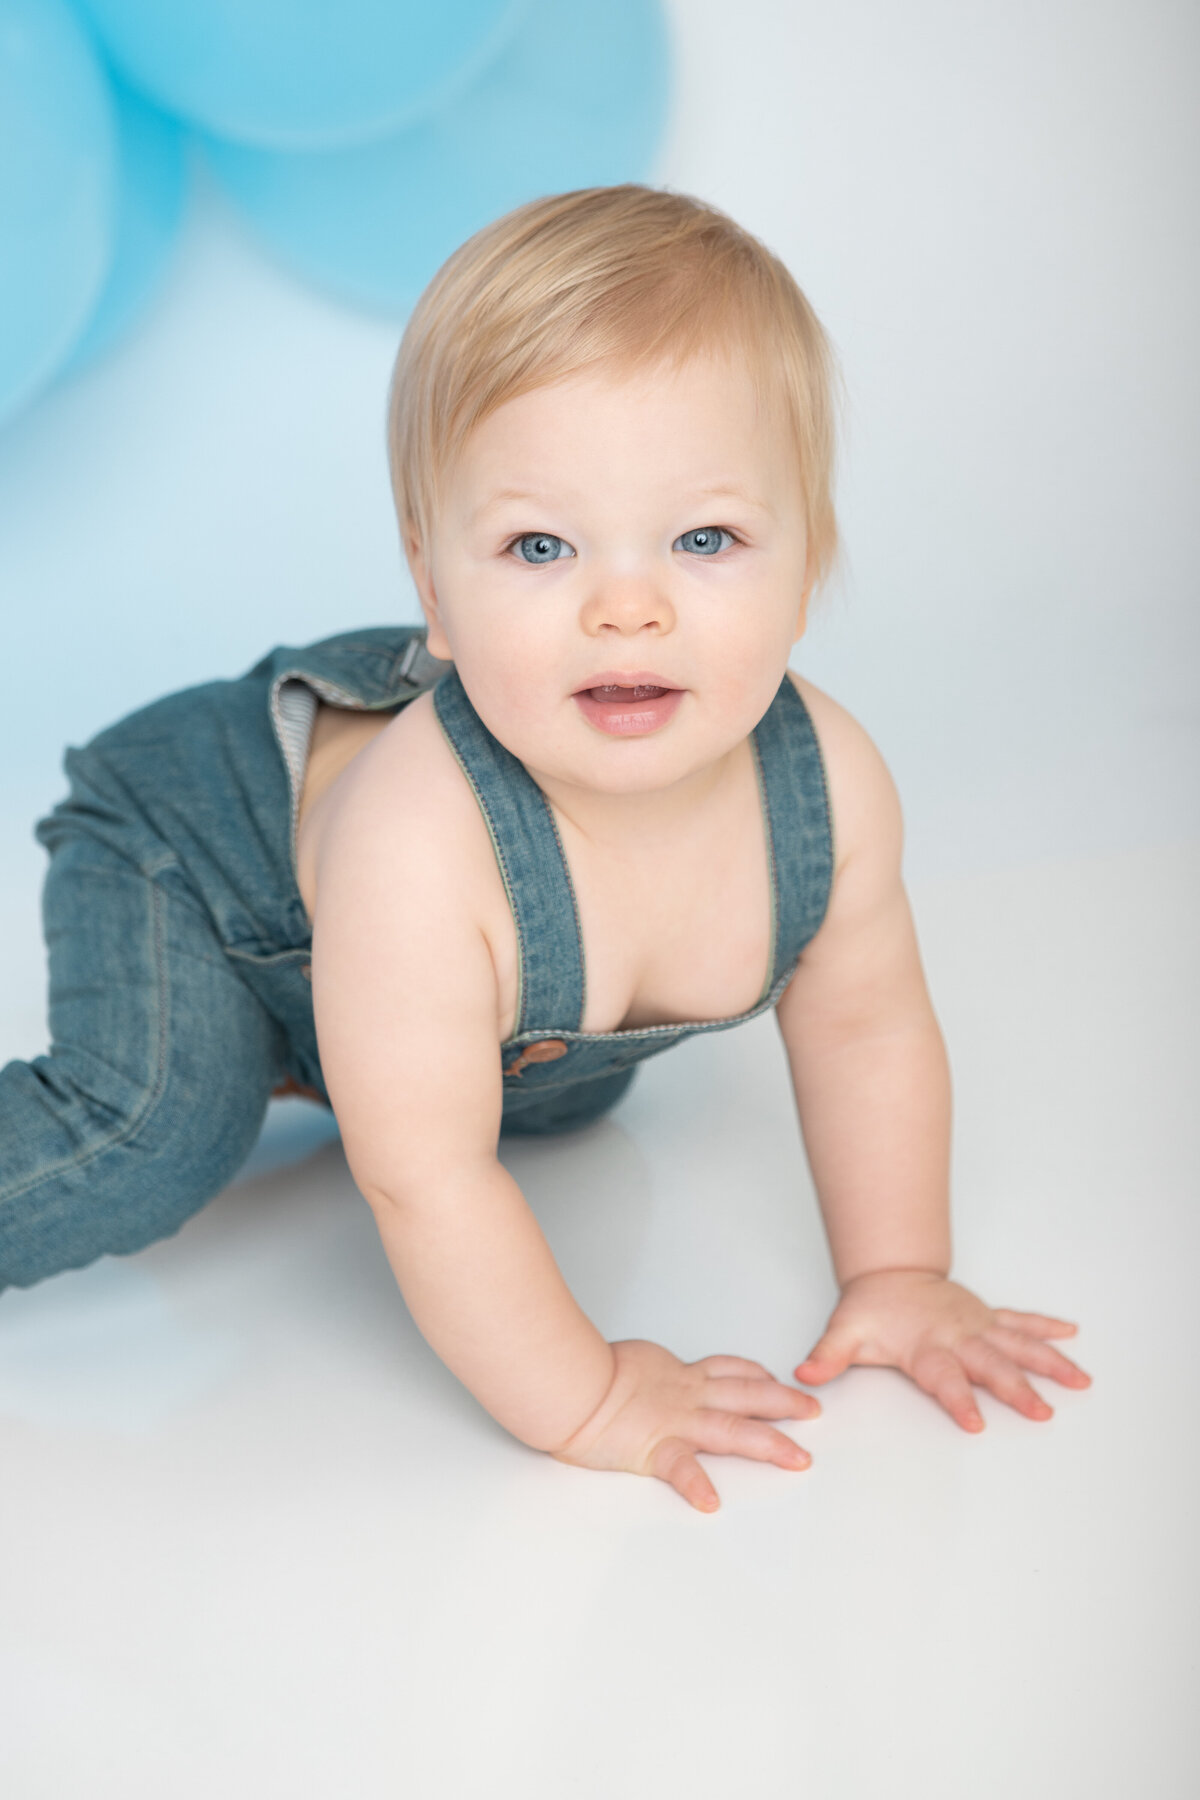 Baby with blue eyes and denim overalls